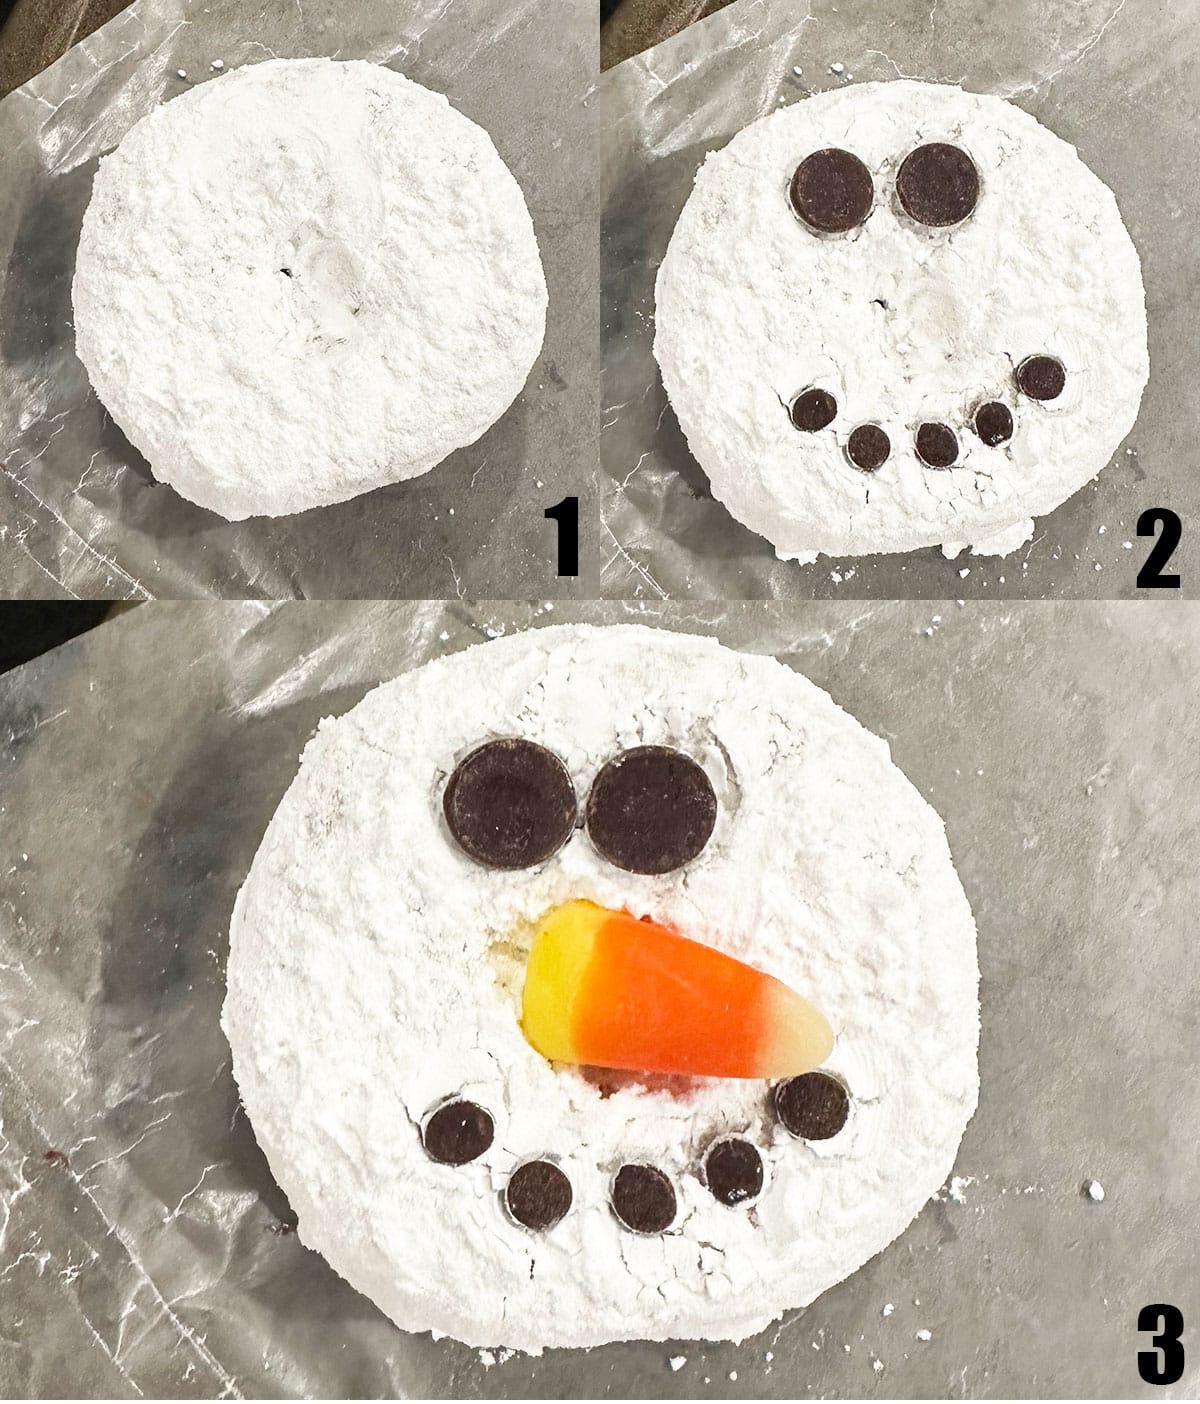 Collage Image With Step by Step Process Shots on How to Make Snowman Donuts.